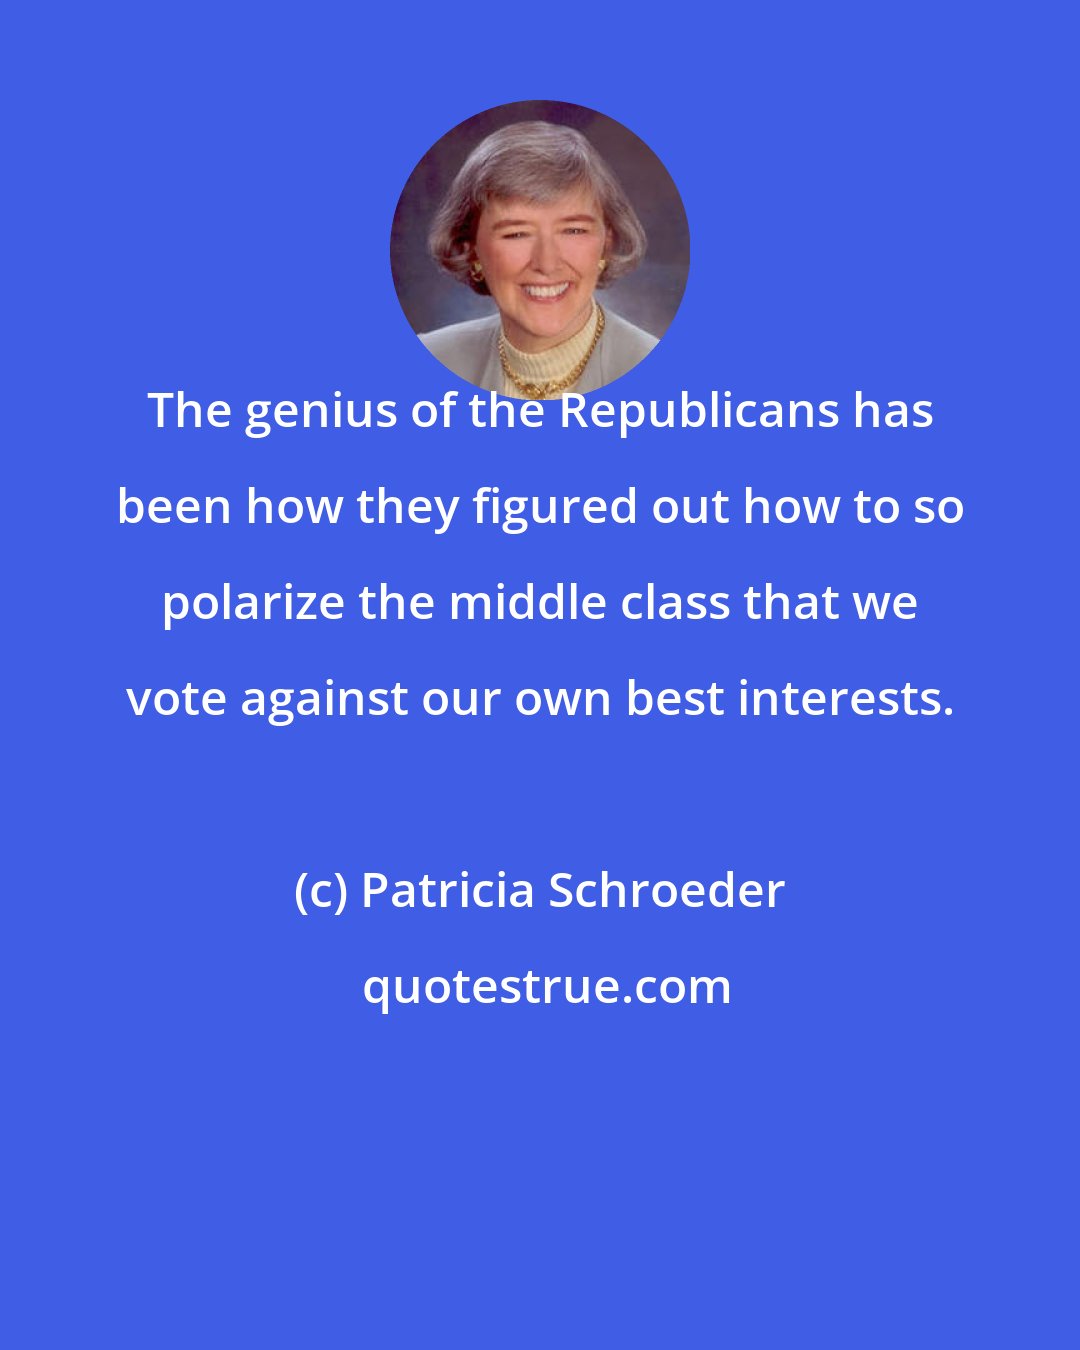 Patricia Schroeder: The genius of the Republicans has been how they figured out how to so polarize the middle class that we vote against our own best interests.